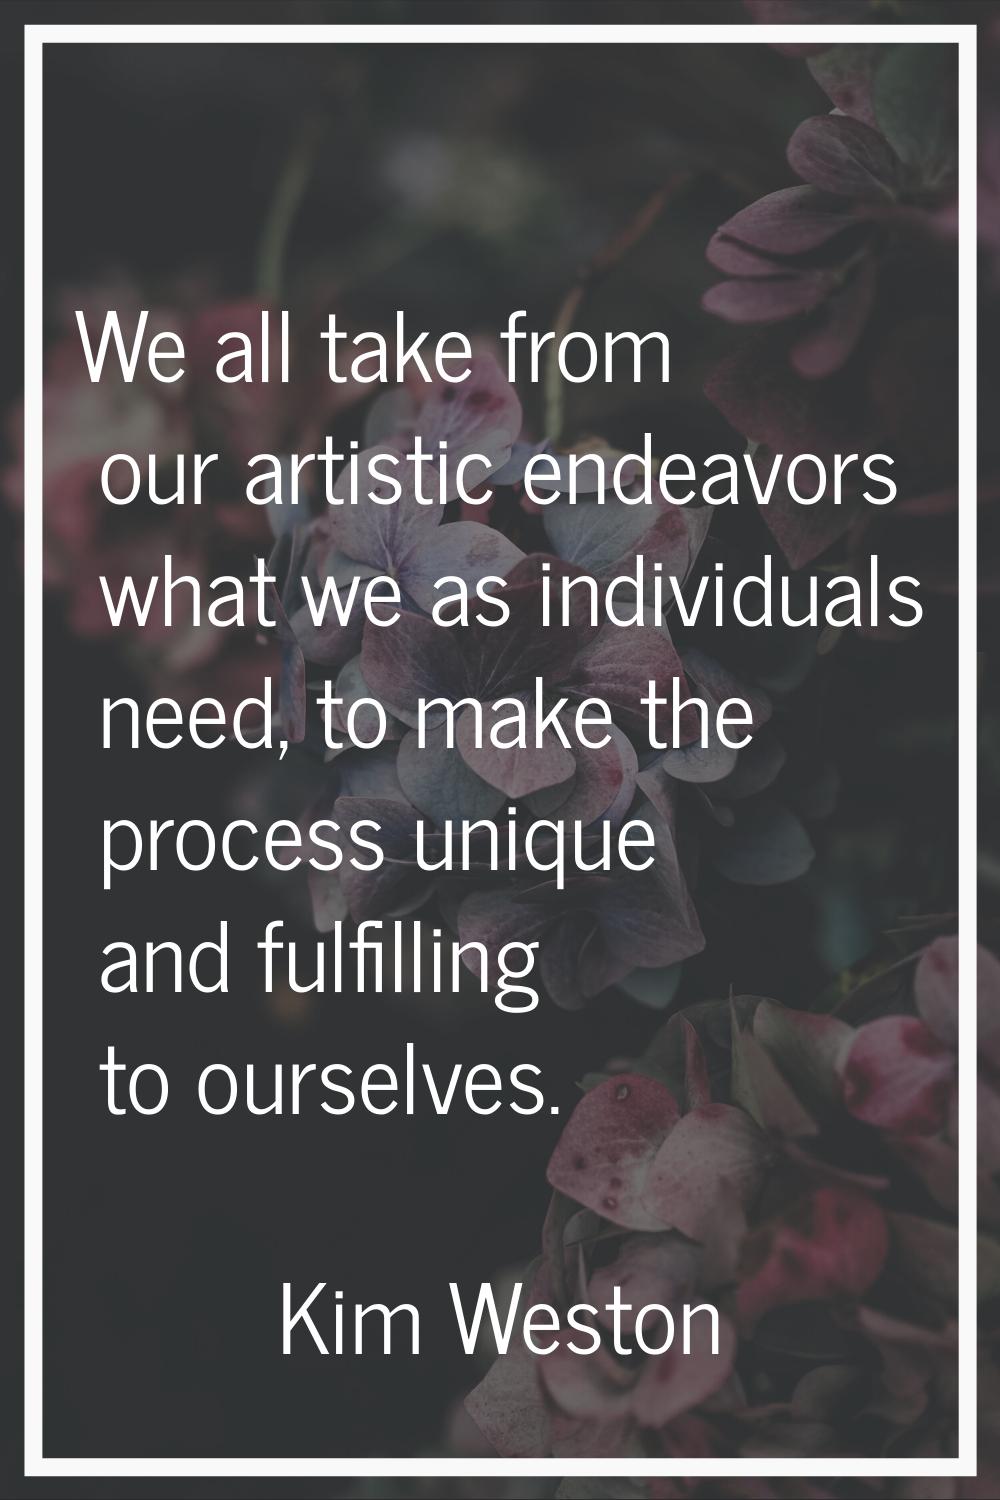 We all take from our artistic endeavors what we as individuals need, to make the process unique and